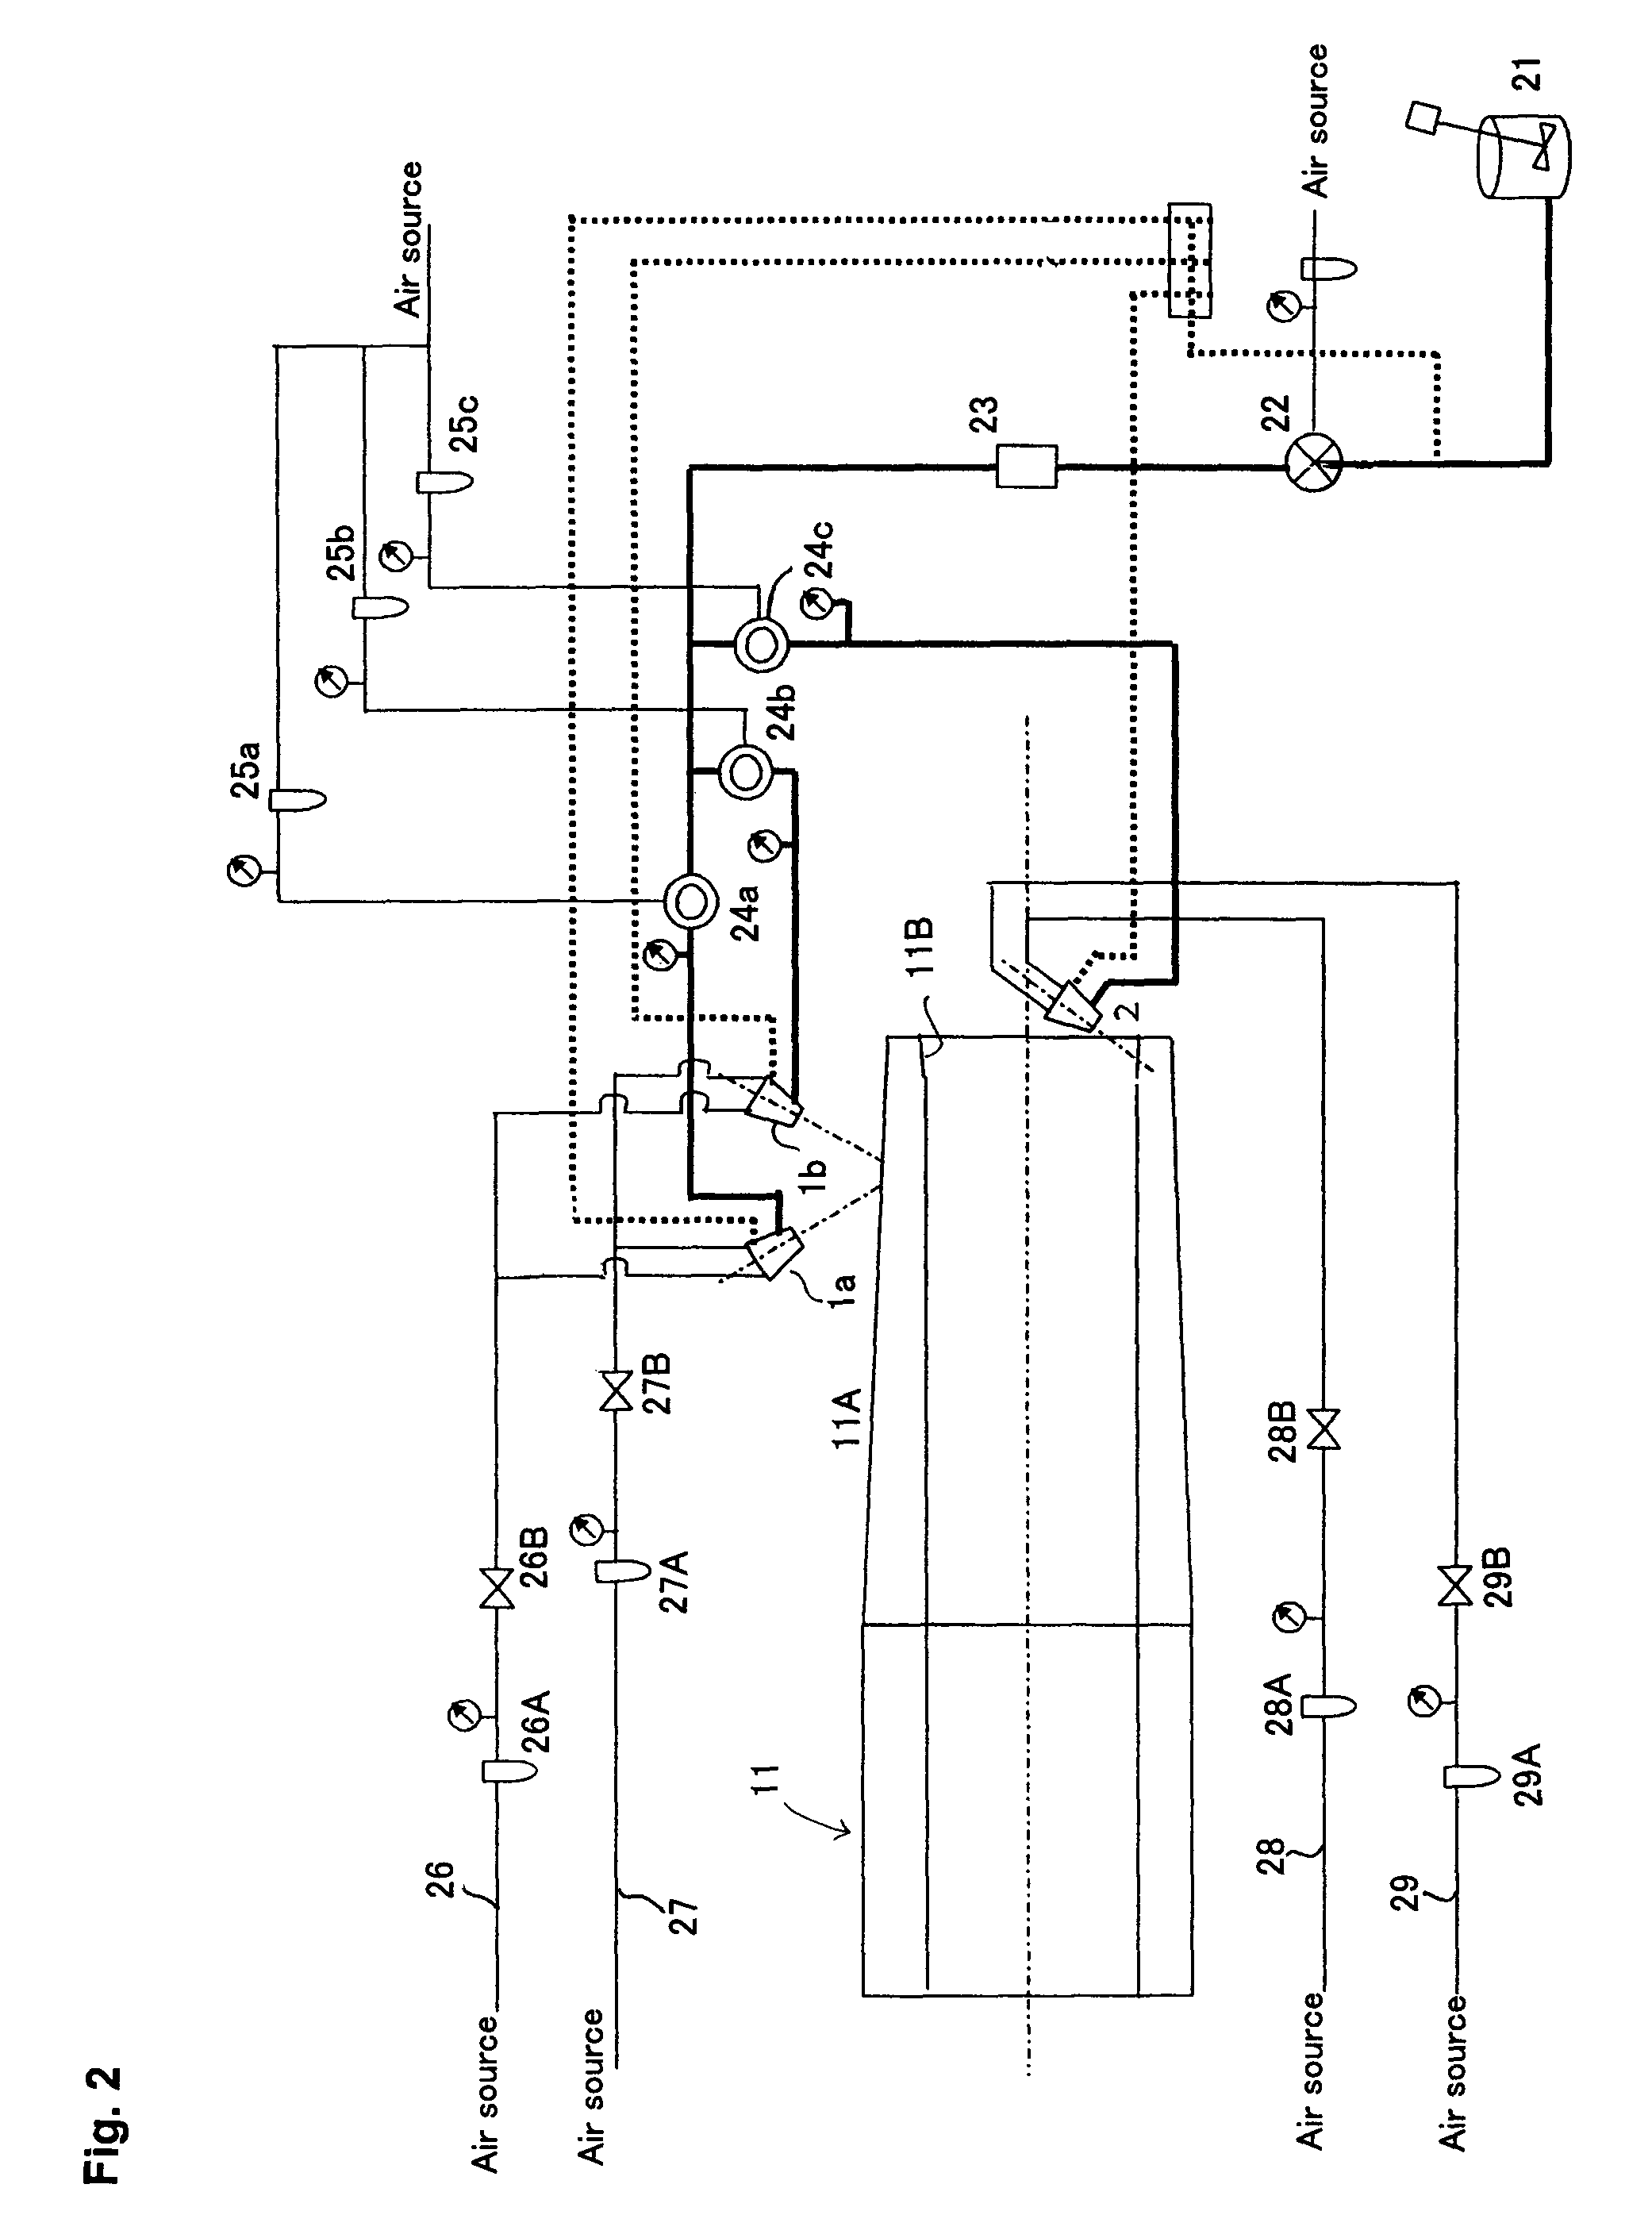 Coating apparatus for applying a UV curable resin to a threaded end of a steel pipe